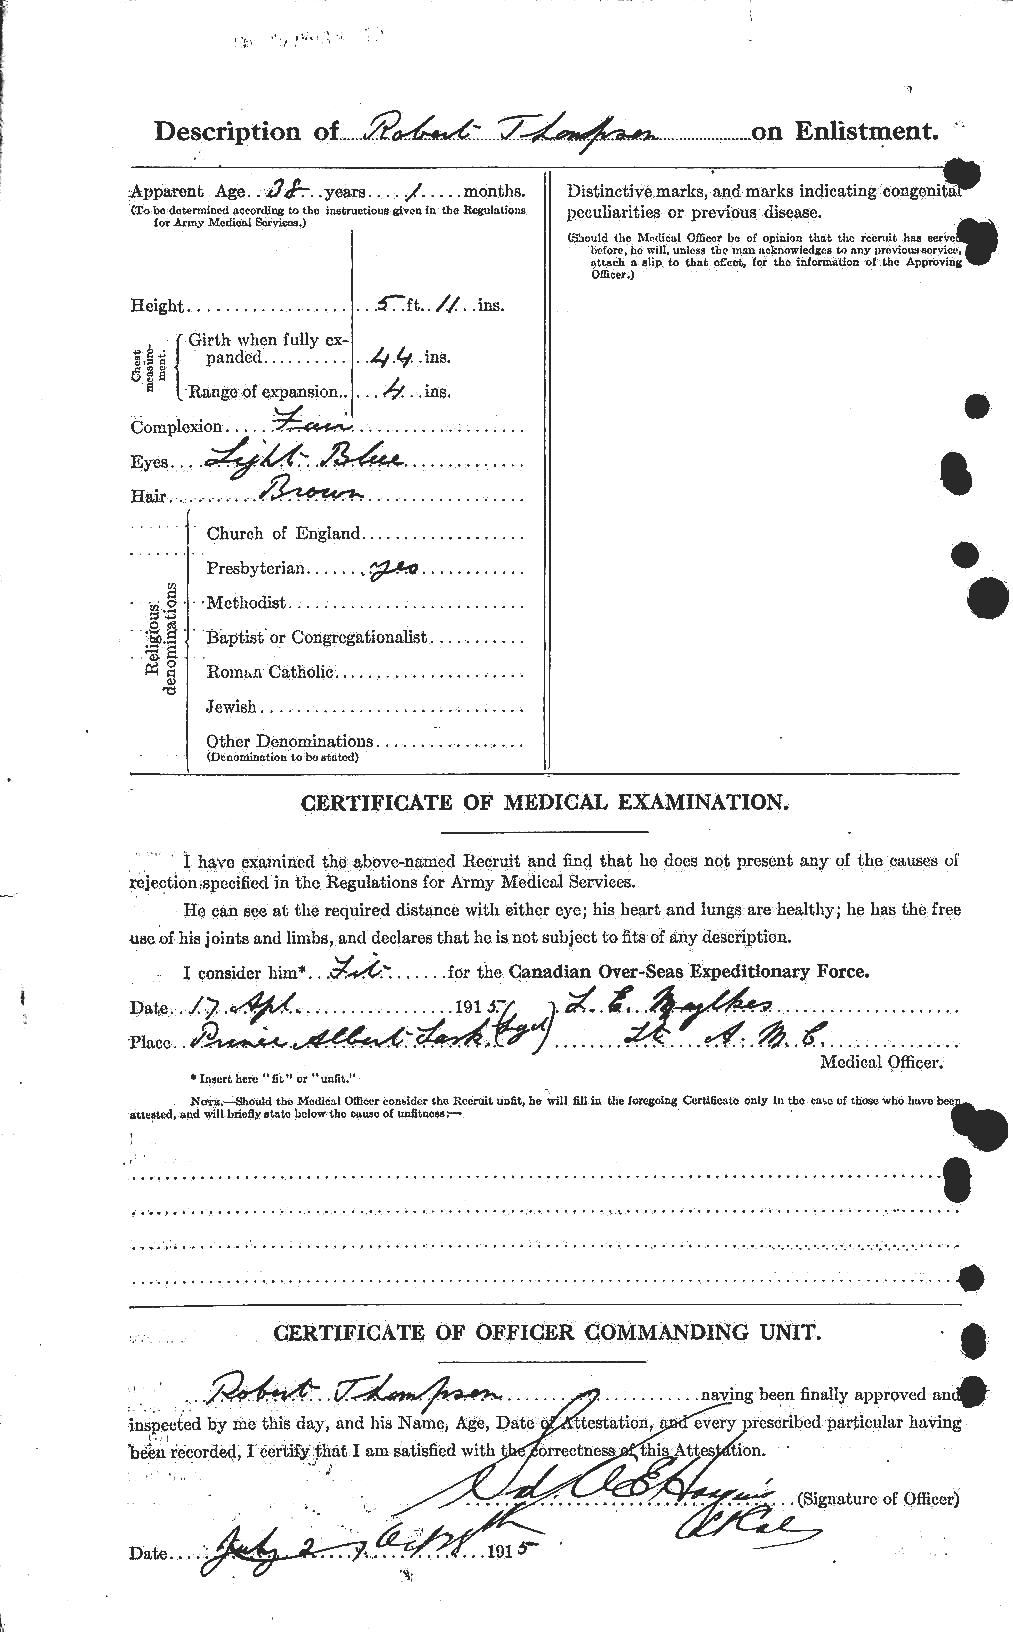 Personnel Records of the First World War - CEF 634267b